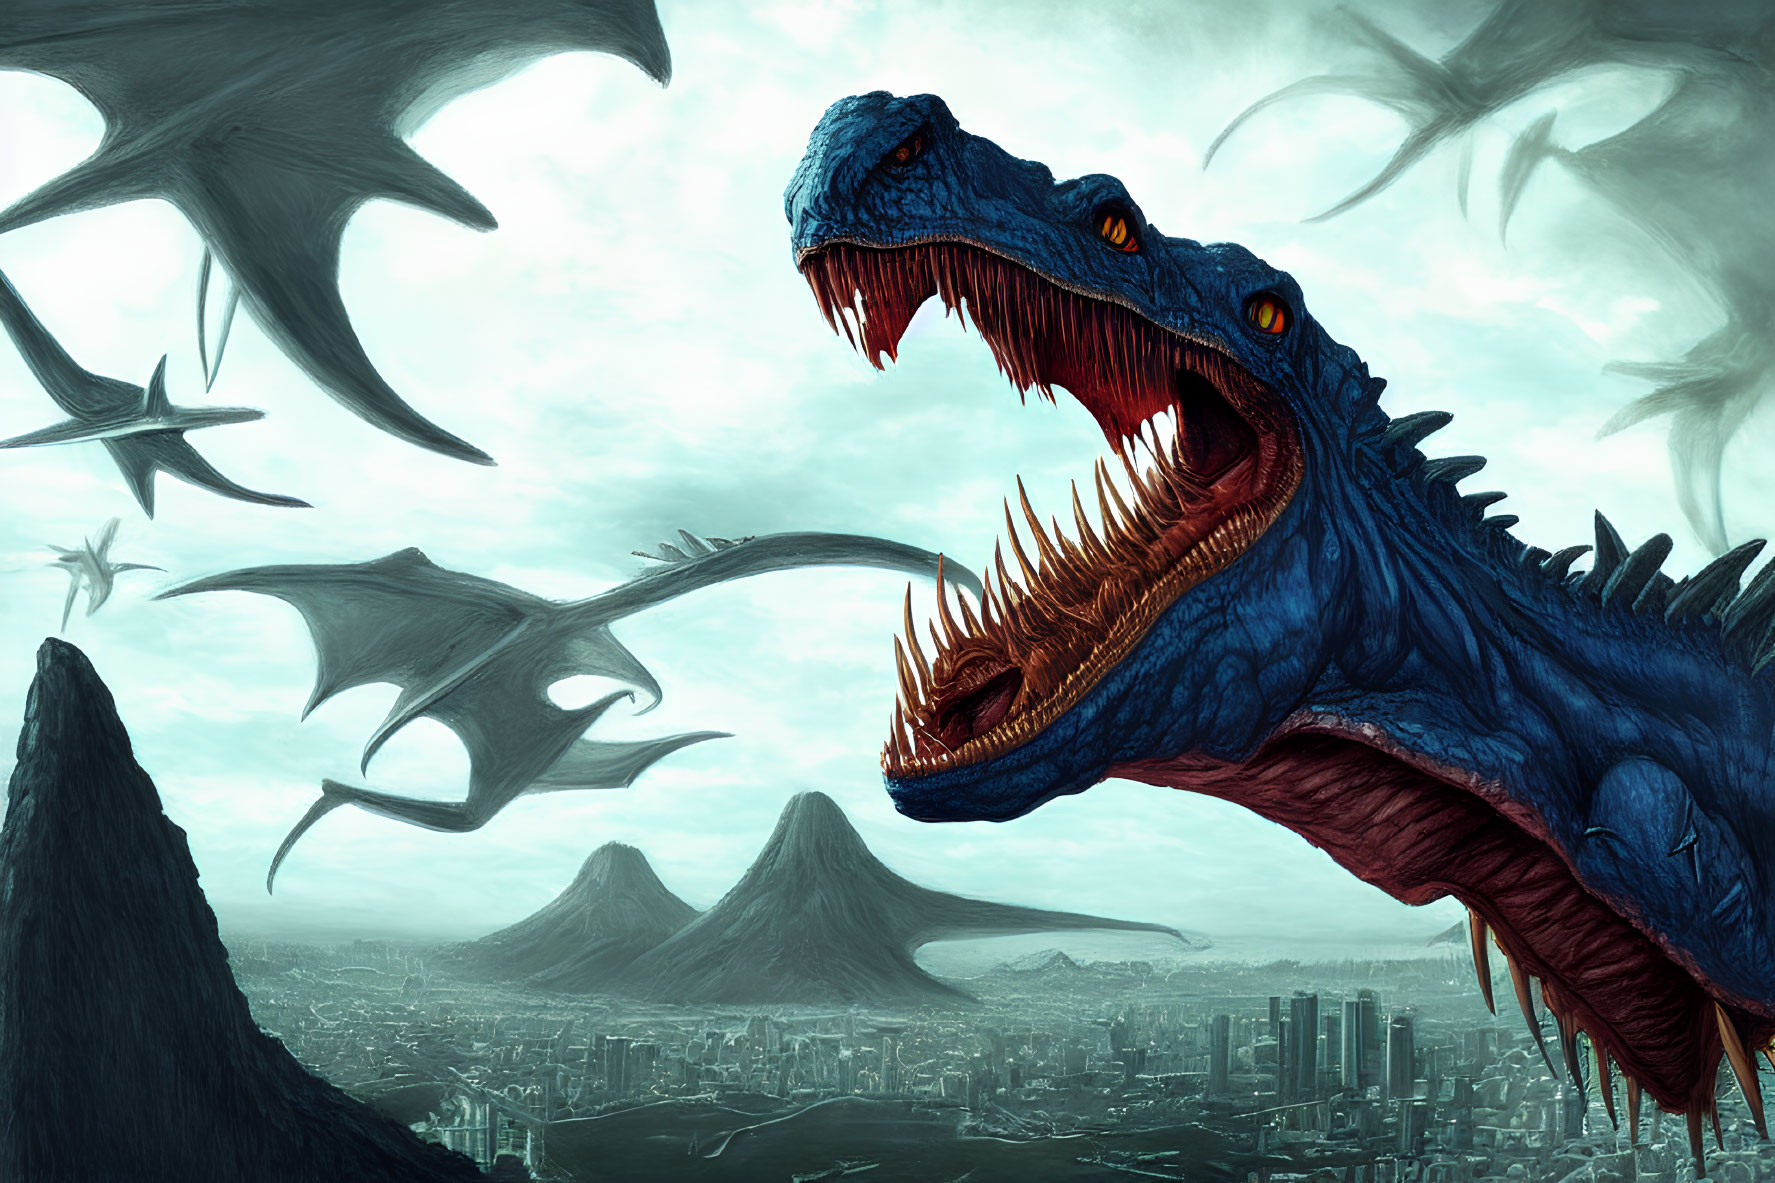 Giant blue dinosaur roaring over city with pterosaurs in stormy sky